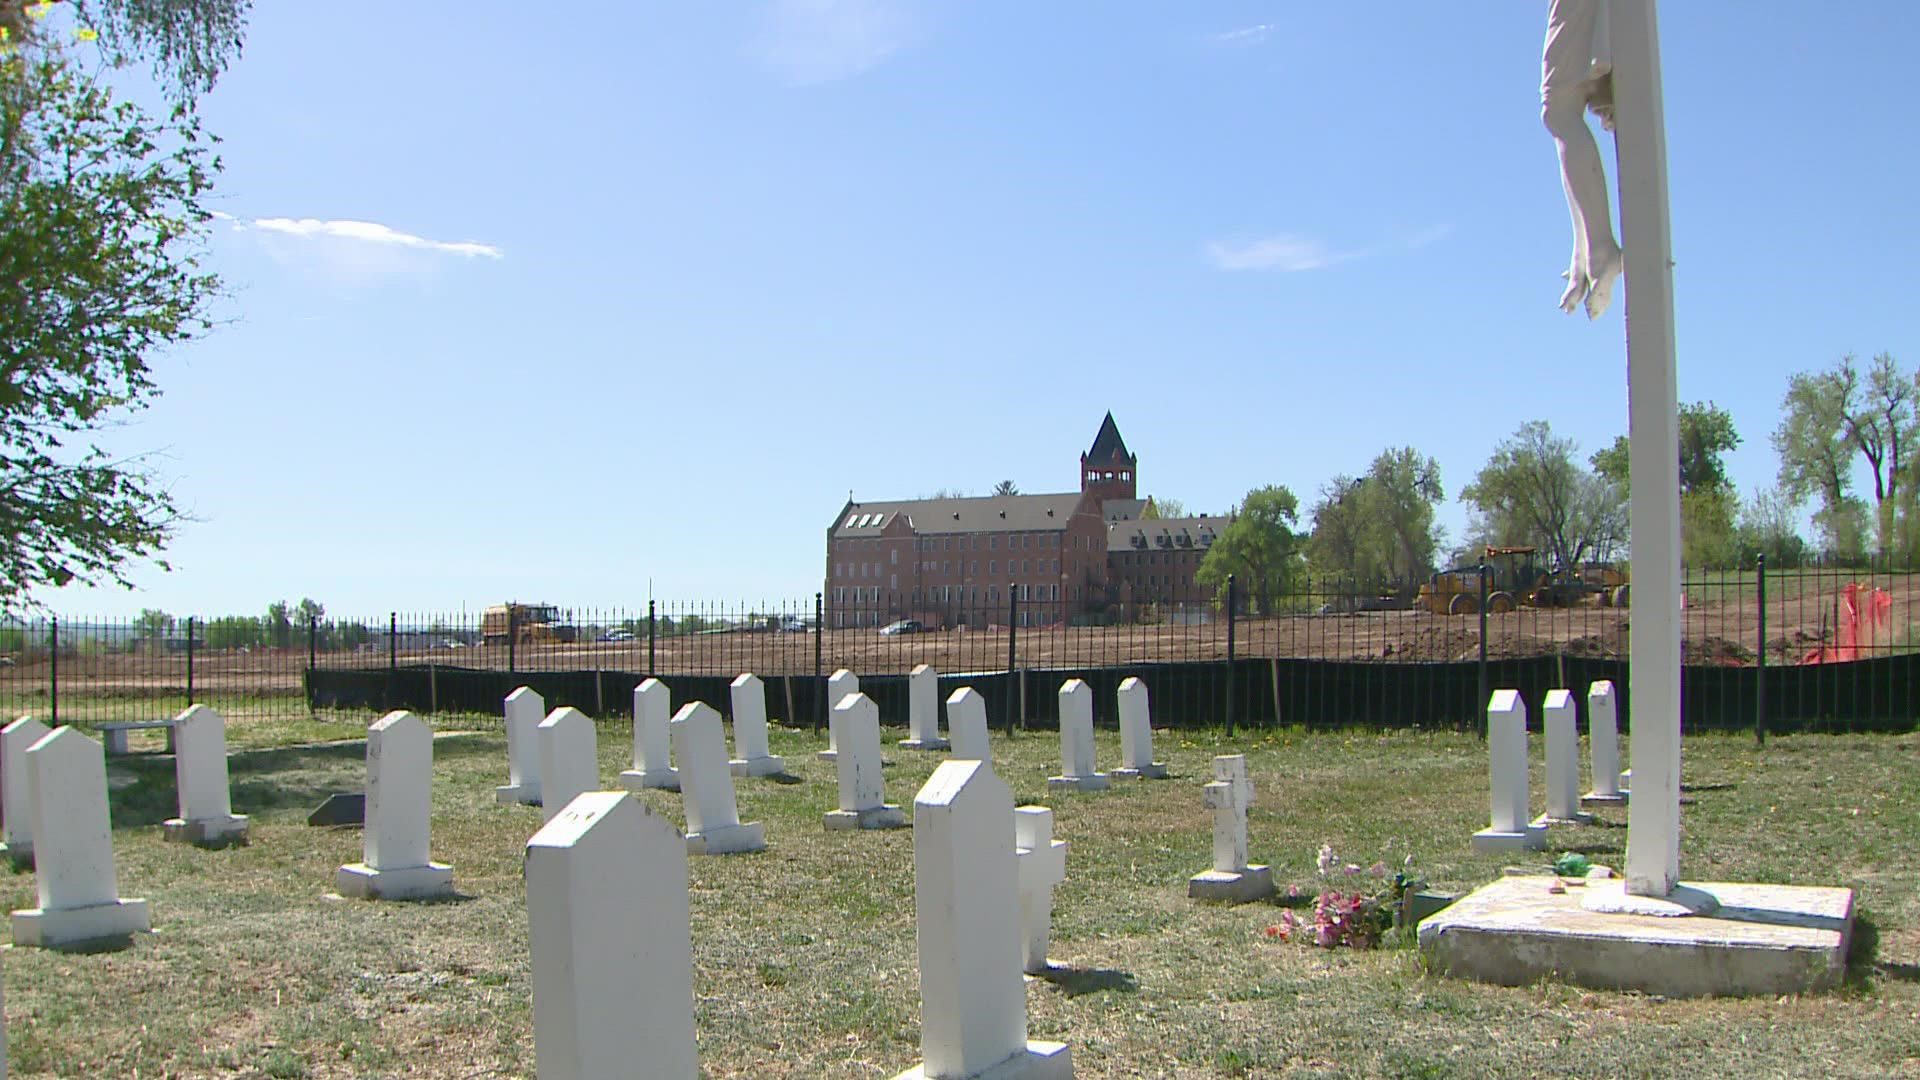 Remains of 62 nuns buried at Loretto Heights in Denver are now being relocated.